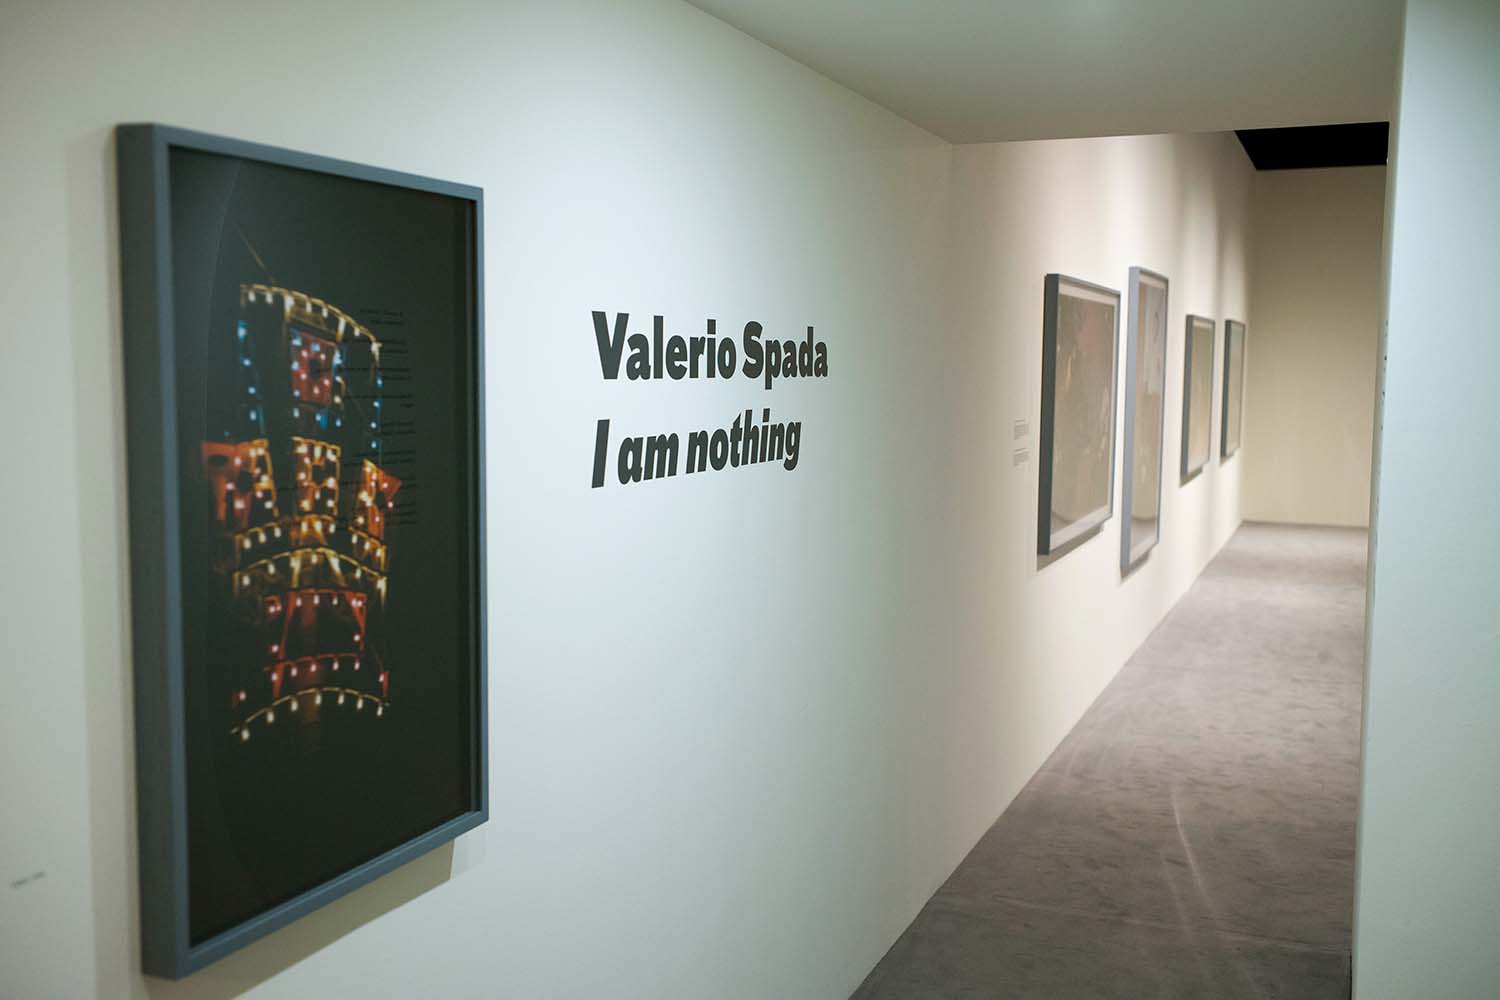 I Am Nothing - The Exhibition by Valerio Spada